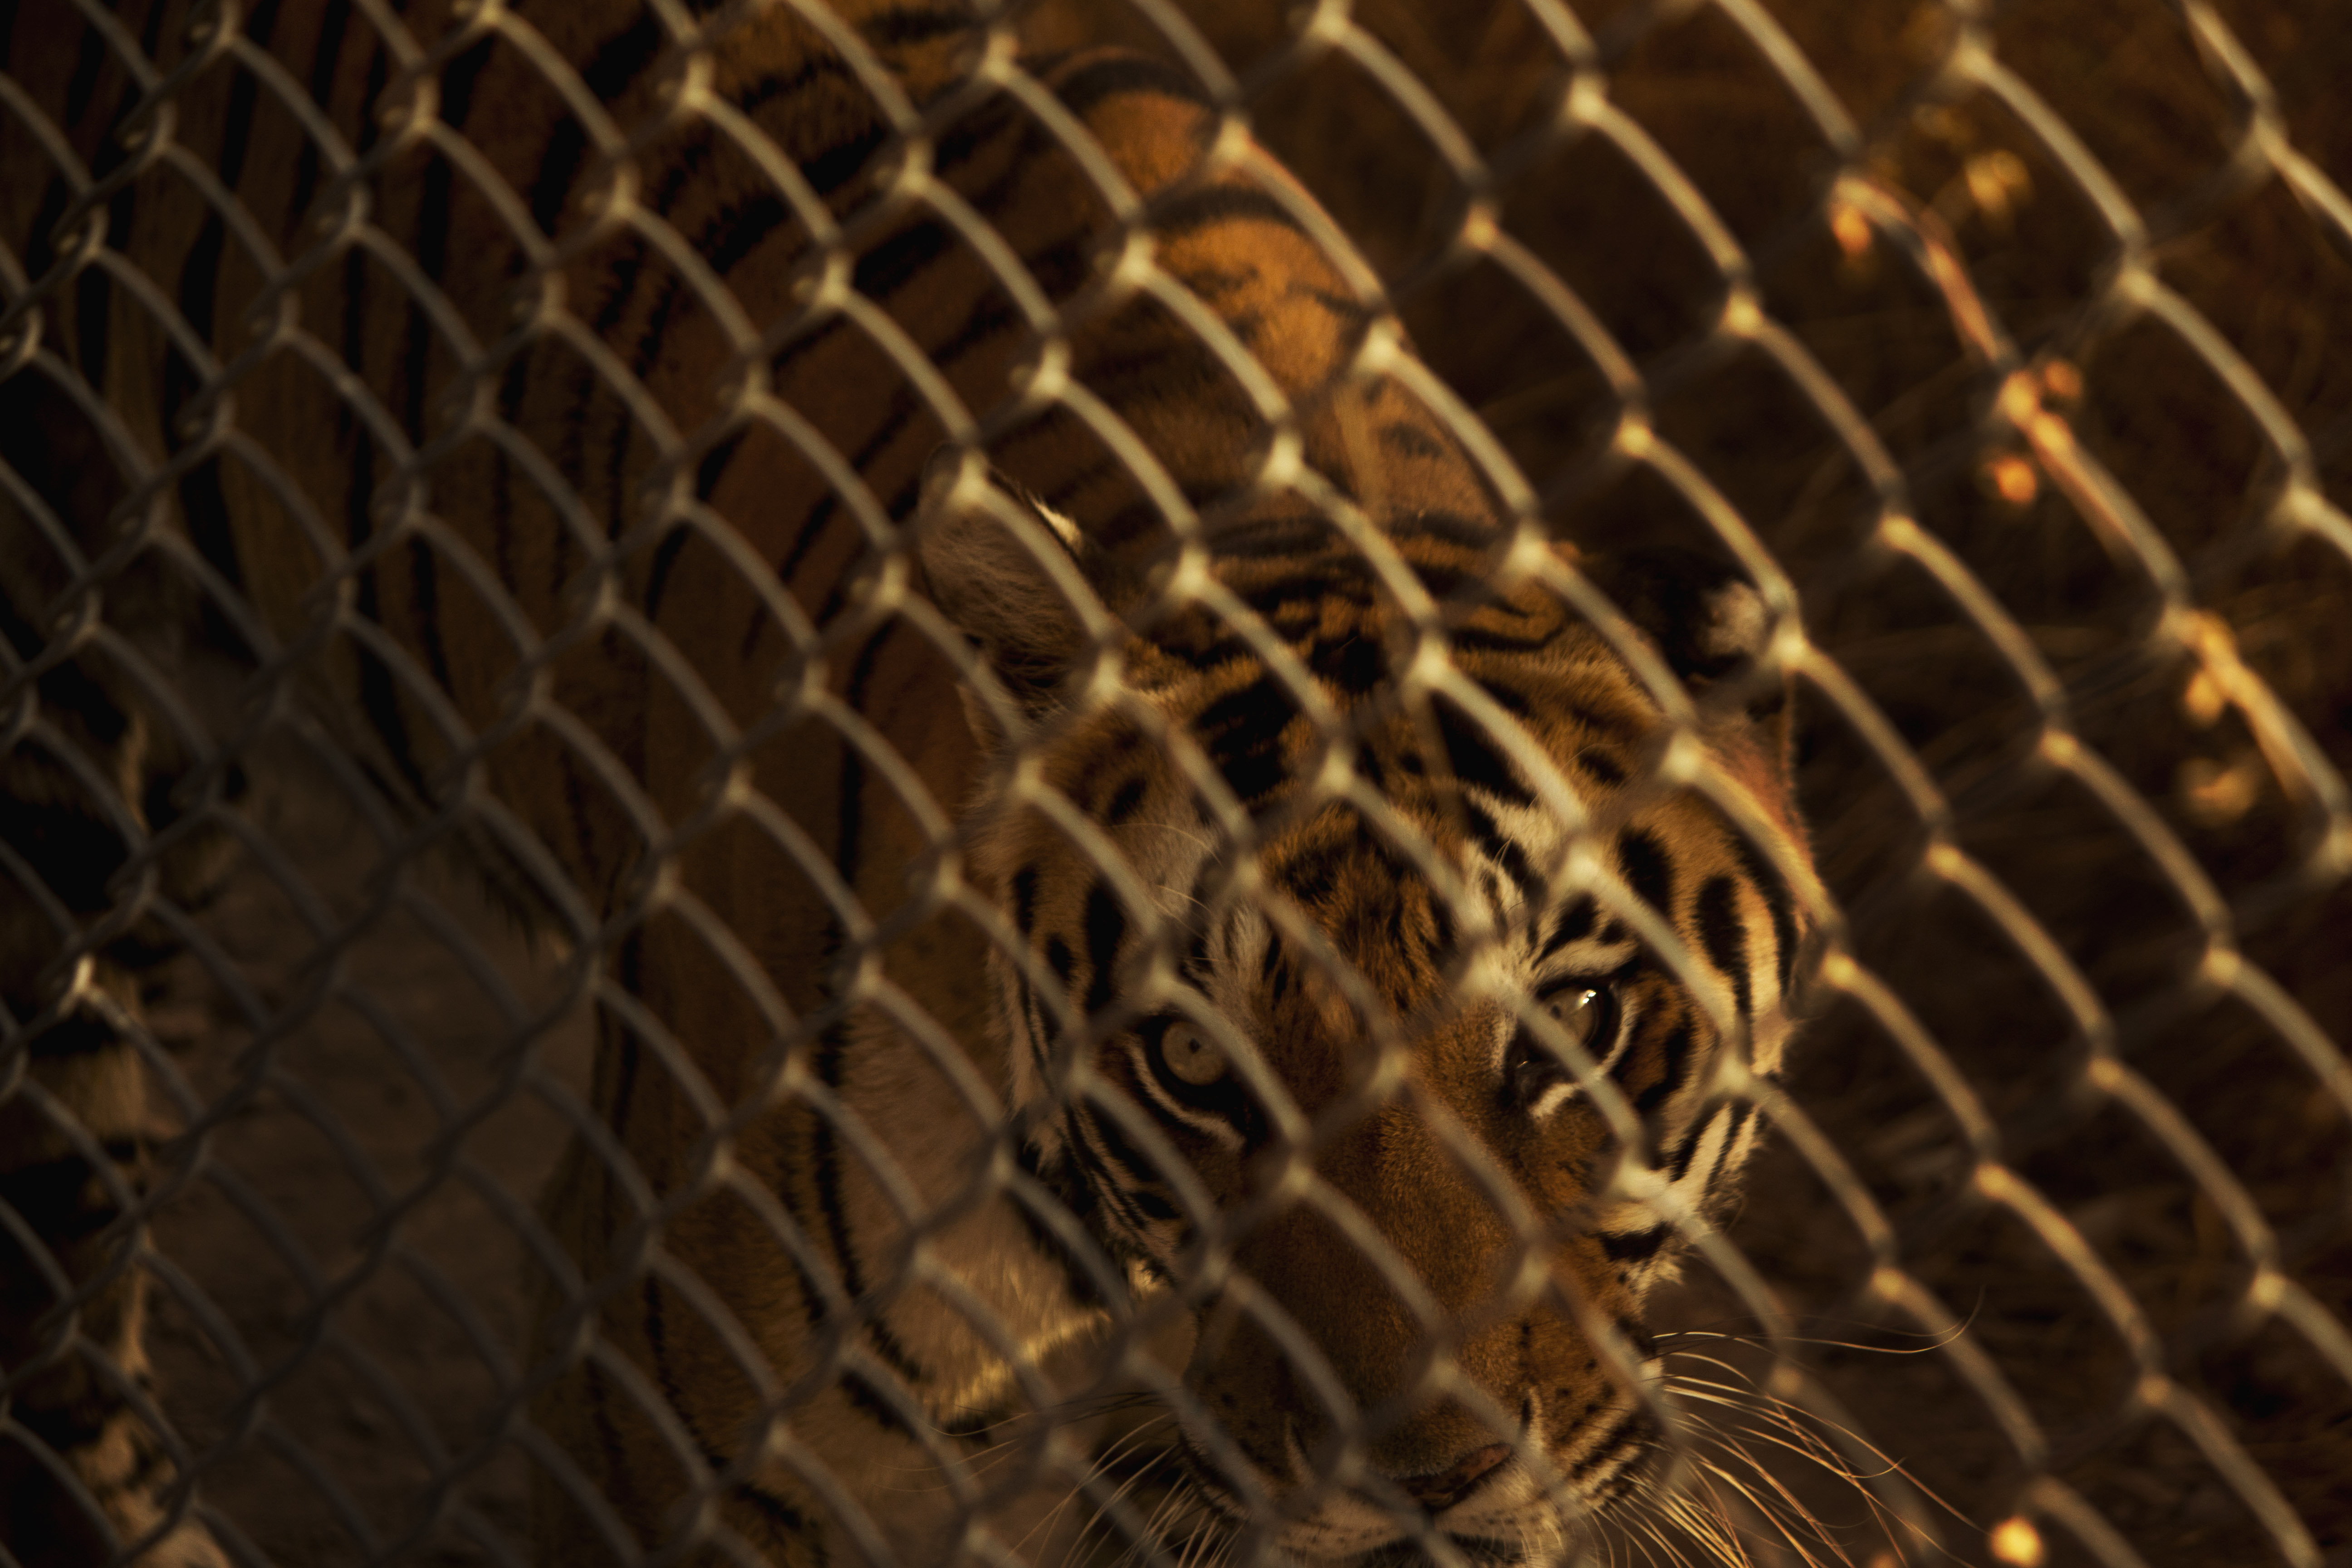 File:Caged Tiger.jpg - Wikimedia Commons